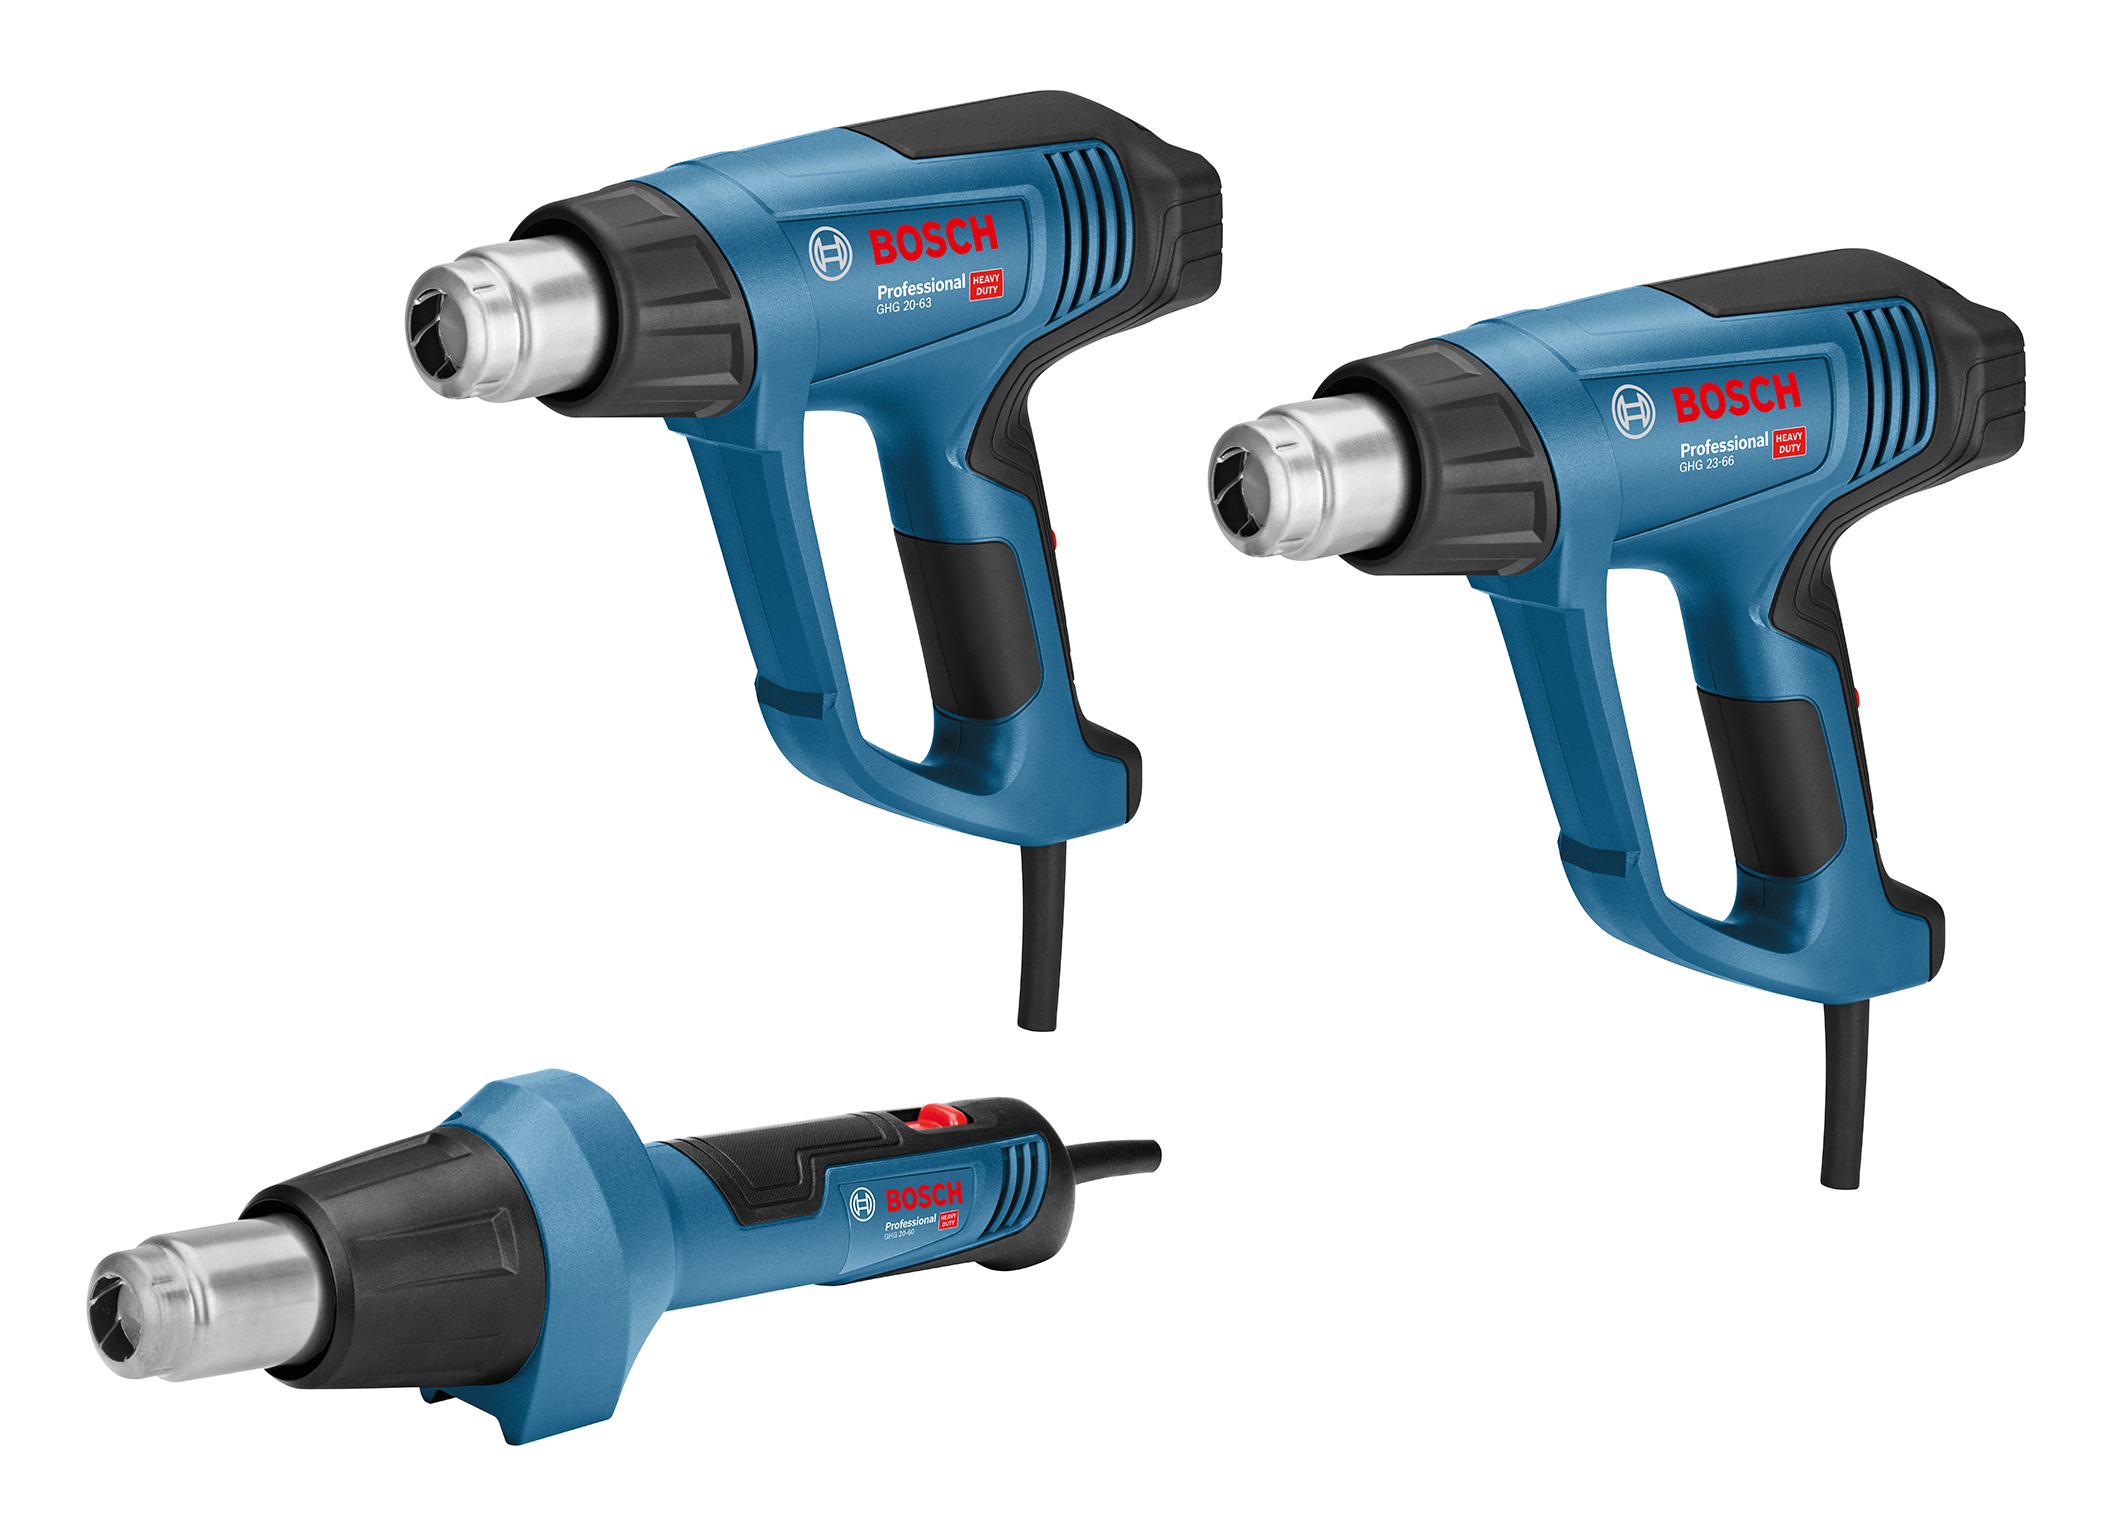 Three different models for various applications: New hot air gun generation from Bosch for professionals